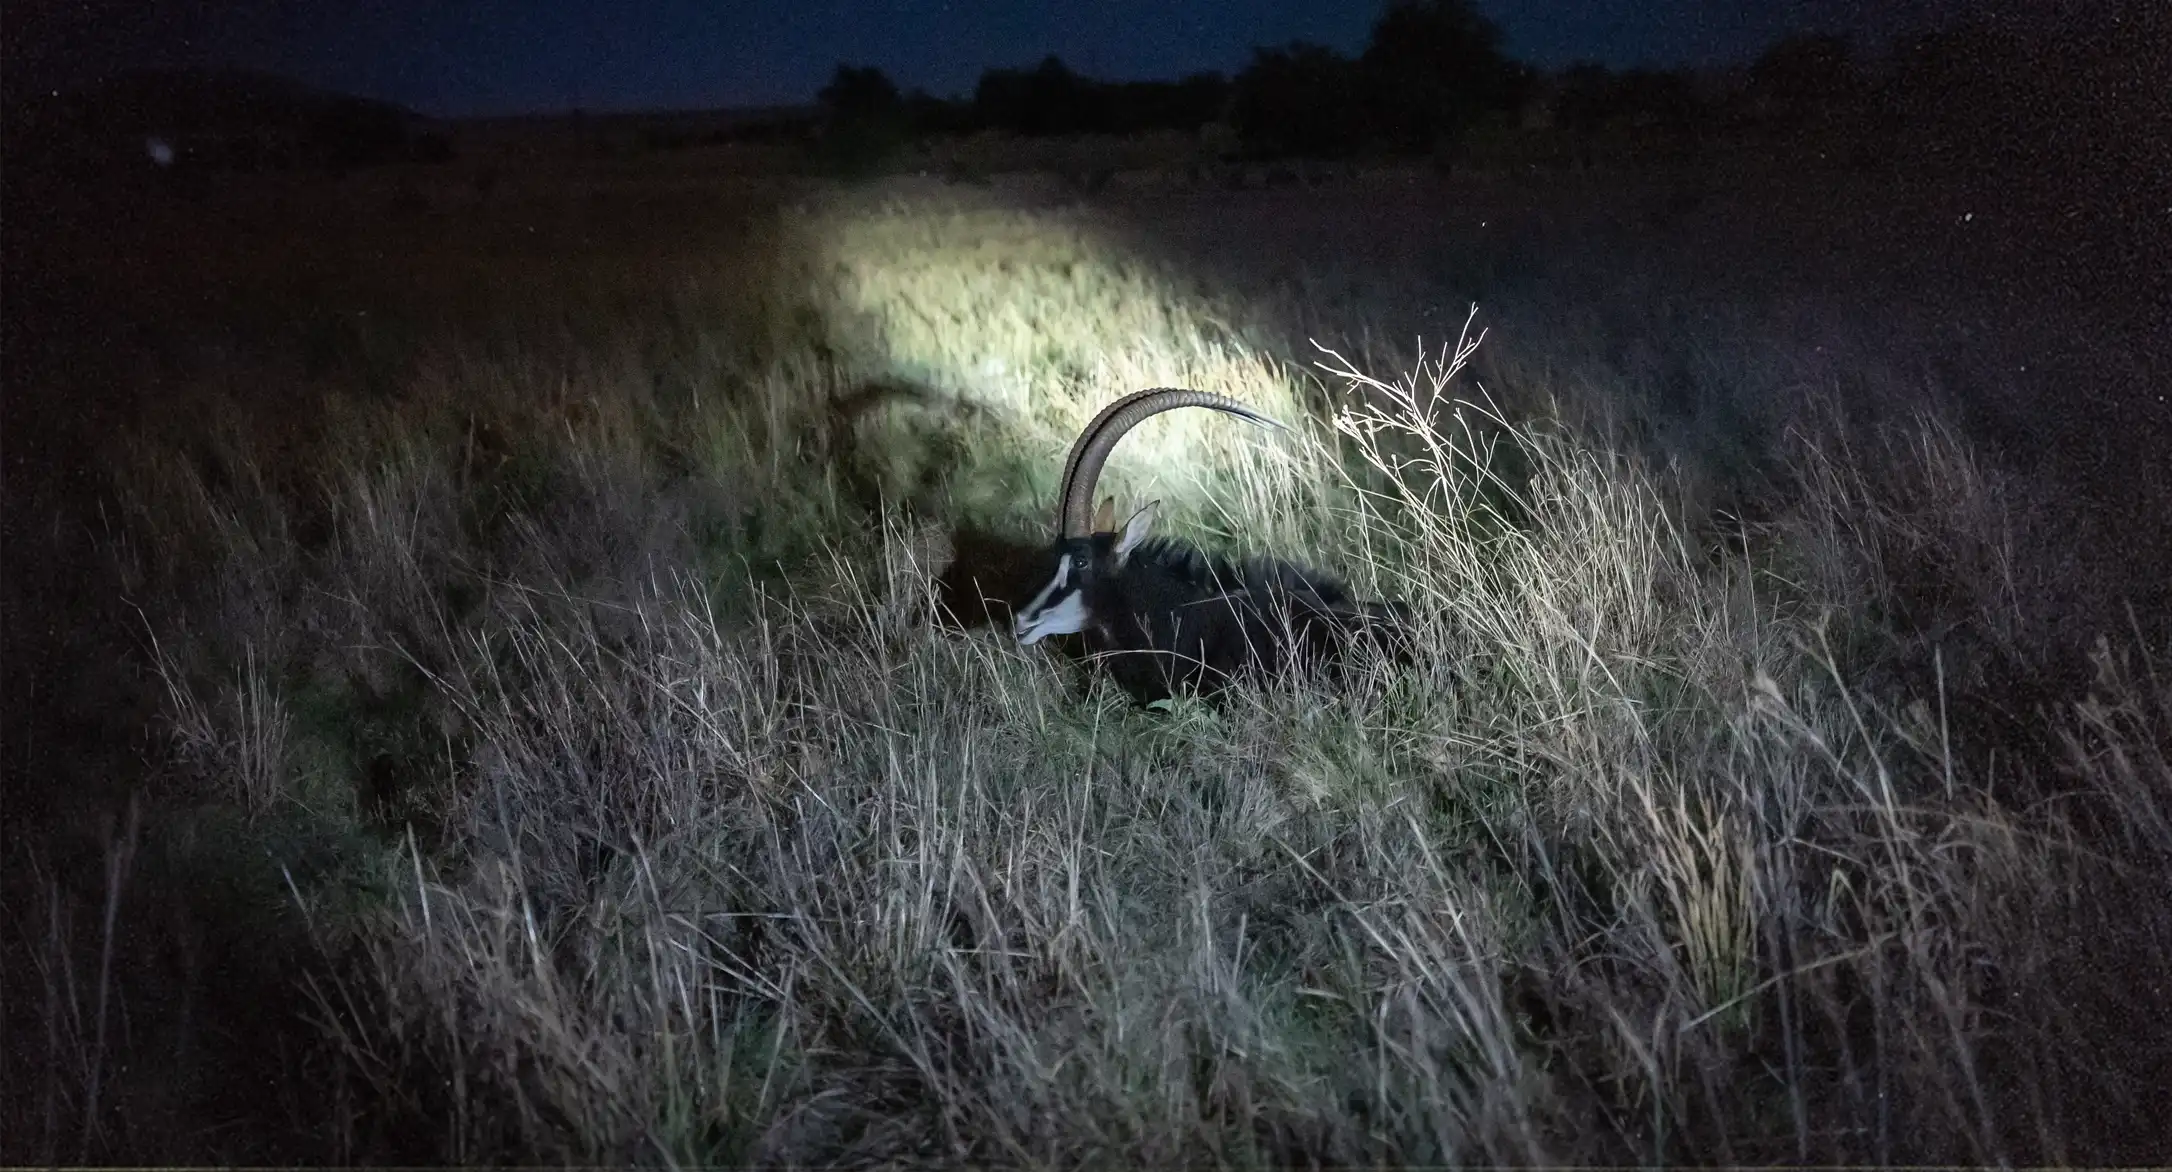 Night shot of a male sable antelope in tall grass, illuminated by a spotlight.